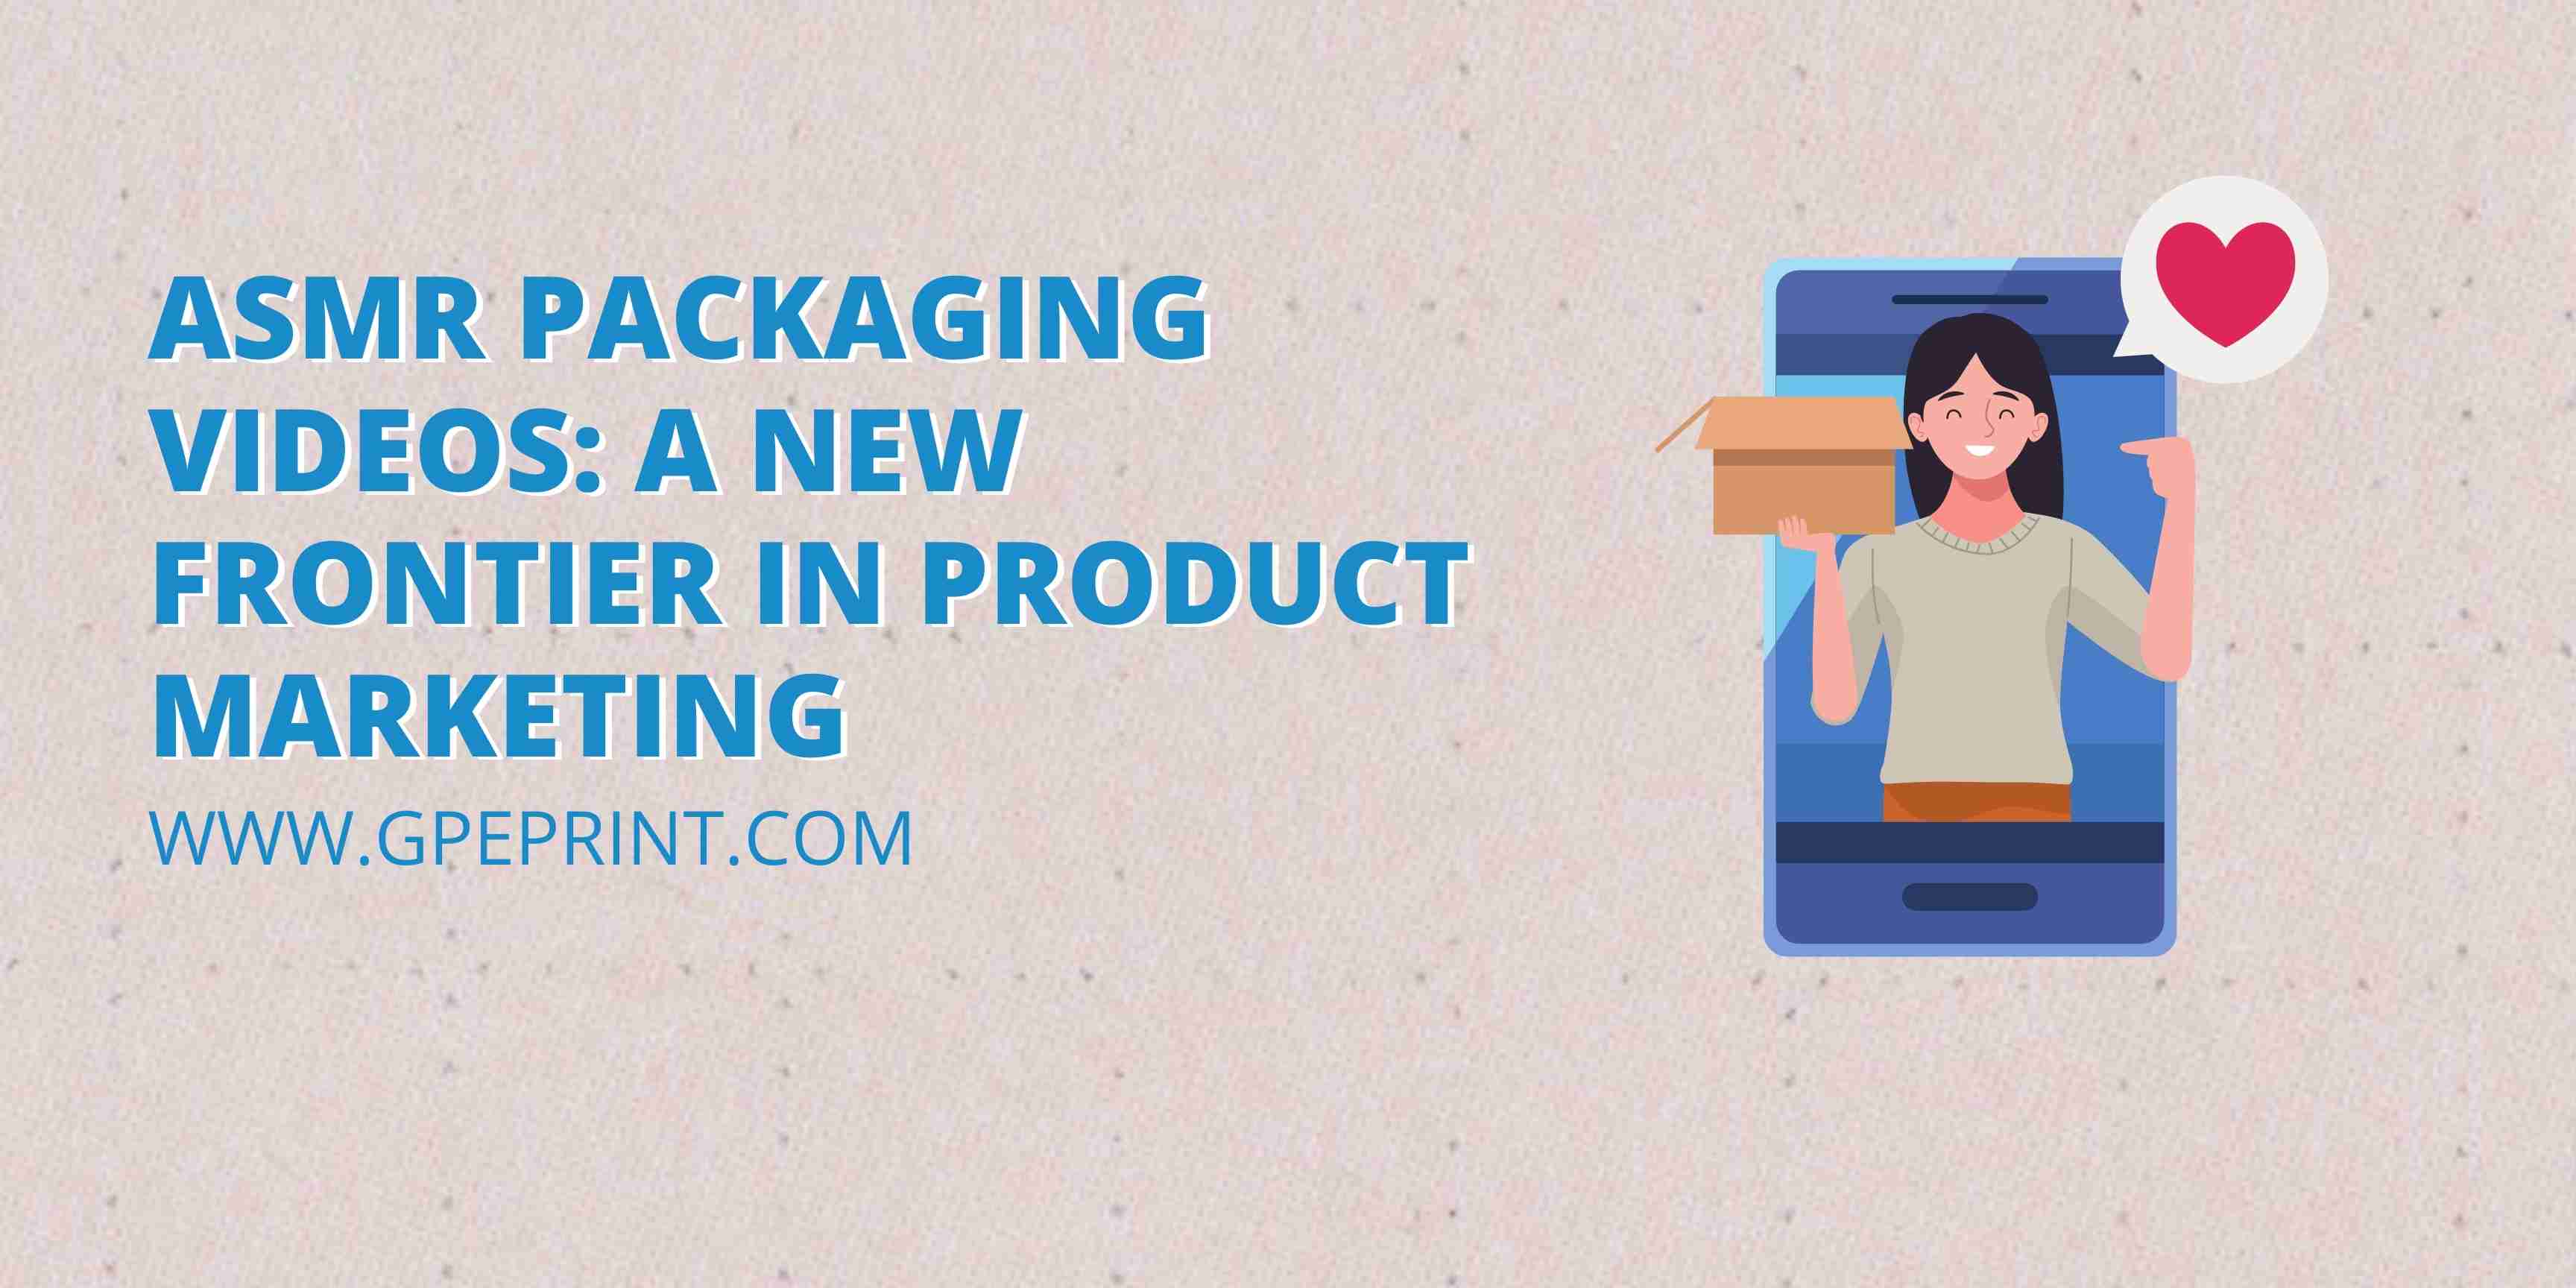 ASMR Packaging Videos: A New Frontier in Product Marketing